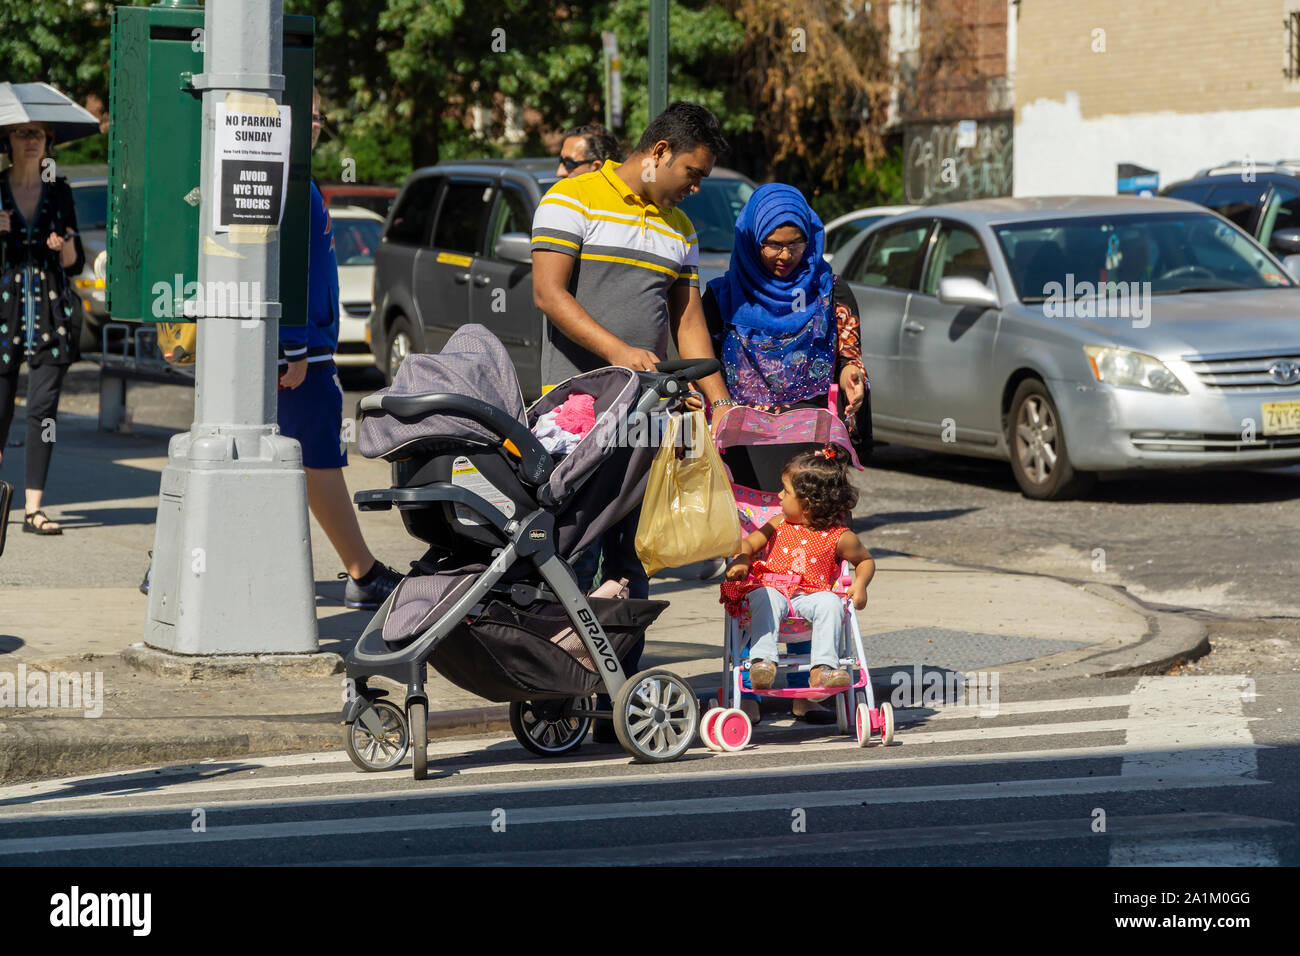 Busy Jackson Heights neighborhood in Queens in New York on Saturday, September 21, 2019. The Jackson Heights neighborhood is home to a mosaic of ethnic groups  which include Hispanics, Indians, Pakistanis, Tibetans, Southeast Asian as well as long-time Jewish and Italian residents.  (© Richard B. Levine) Stock Photo